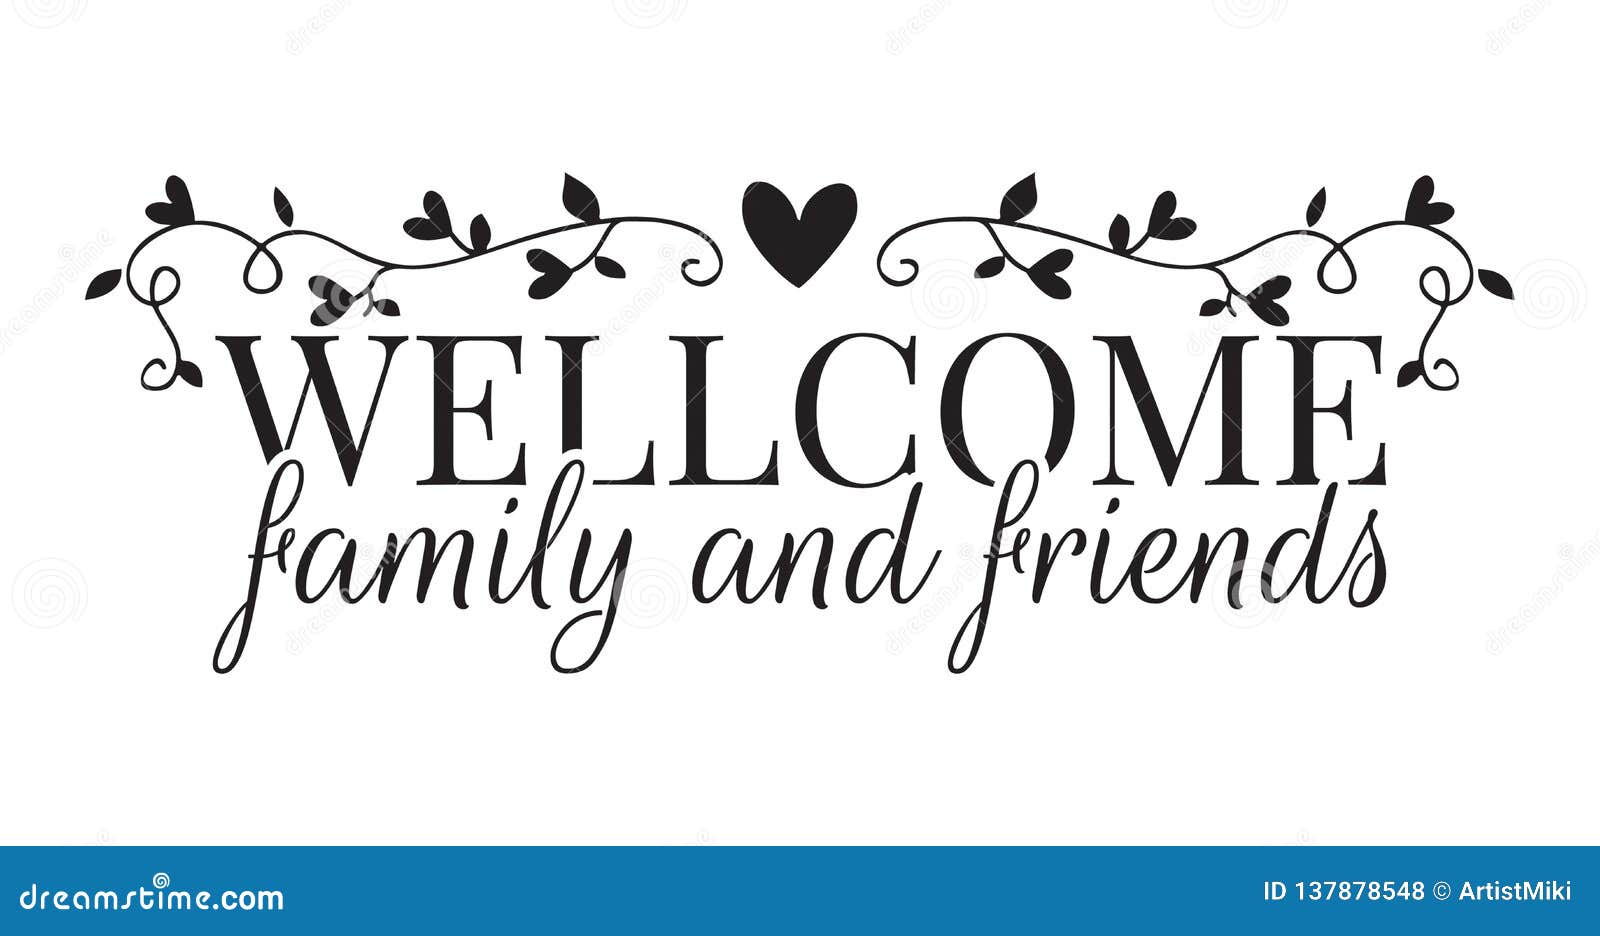 welcome family and friends, wall decals, wording 